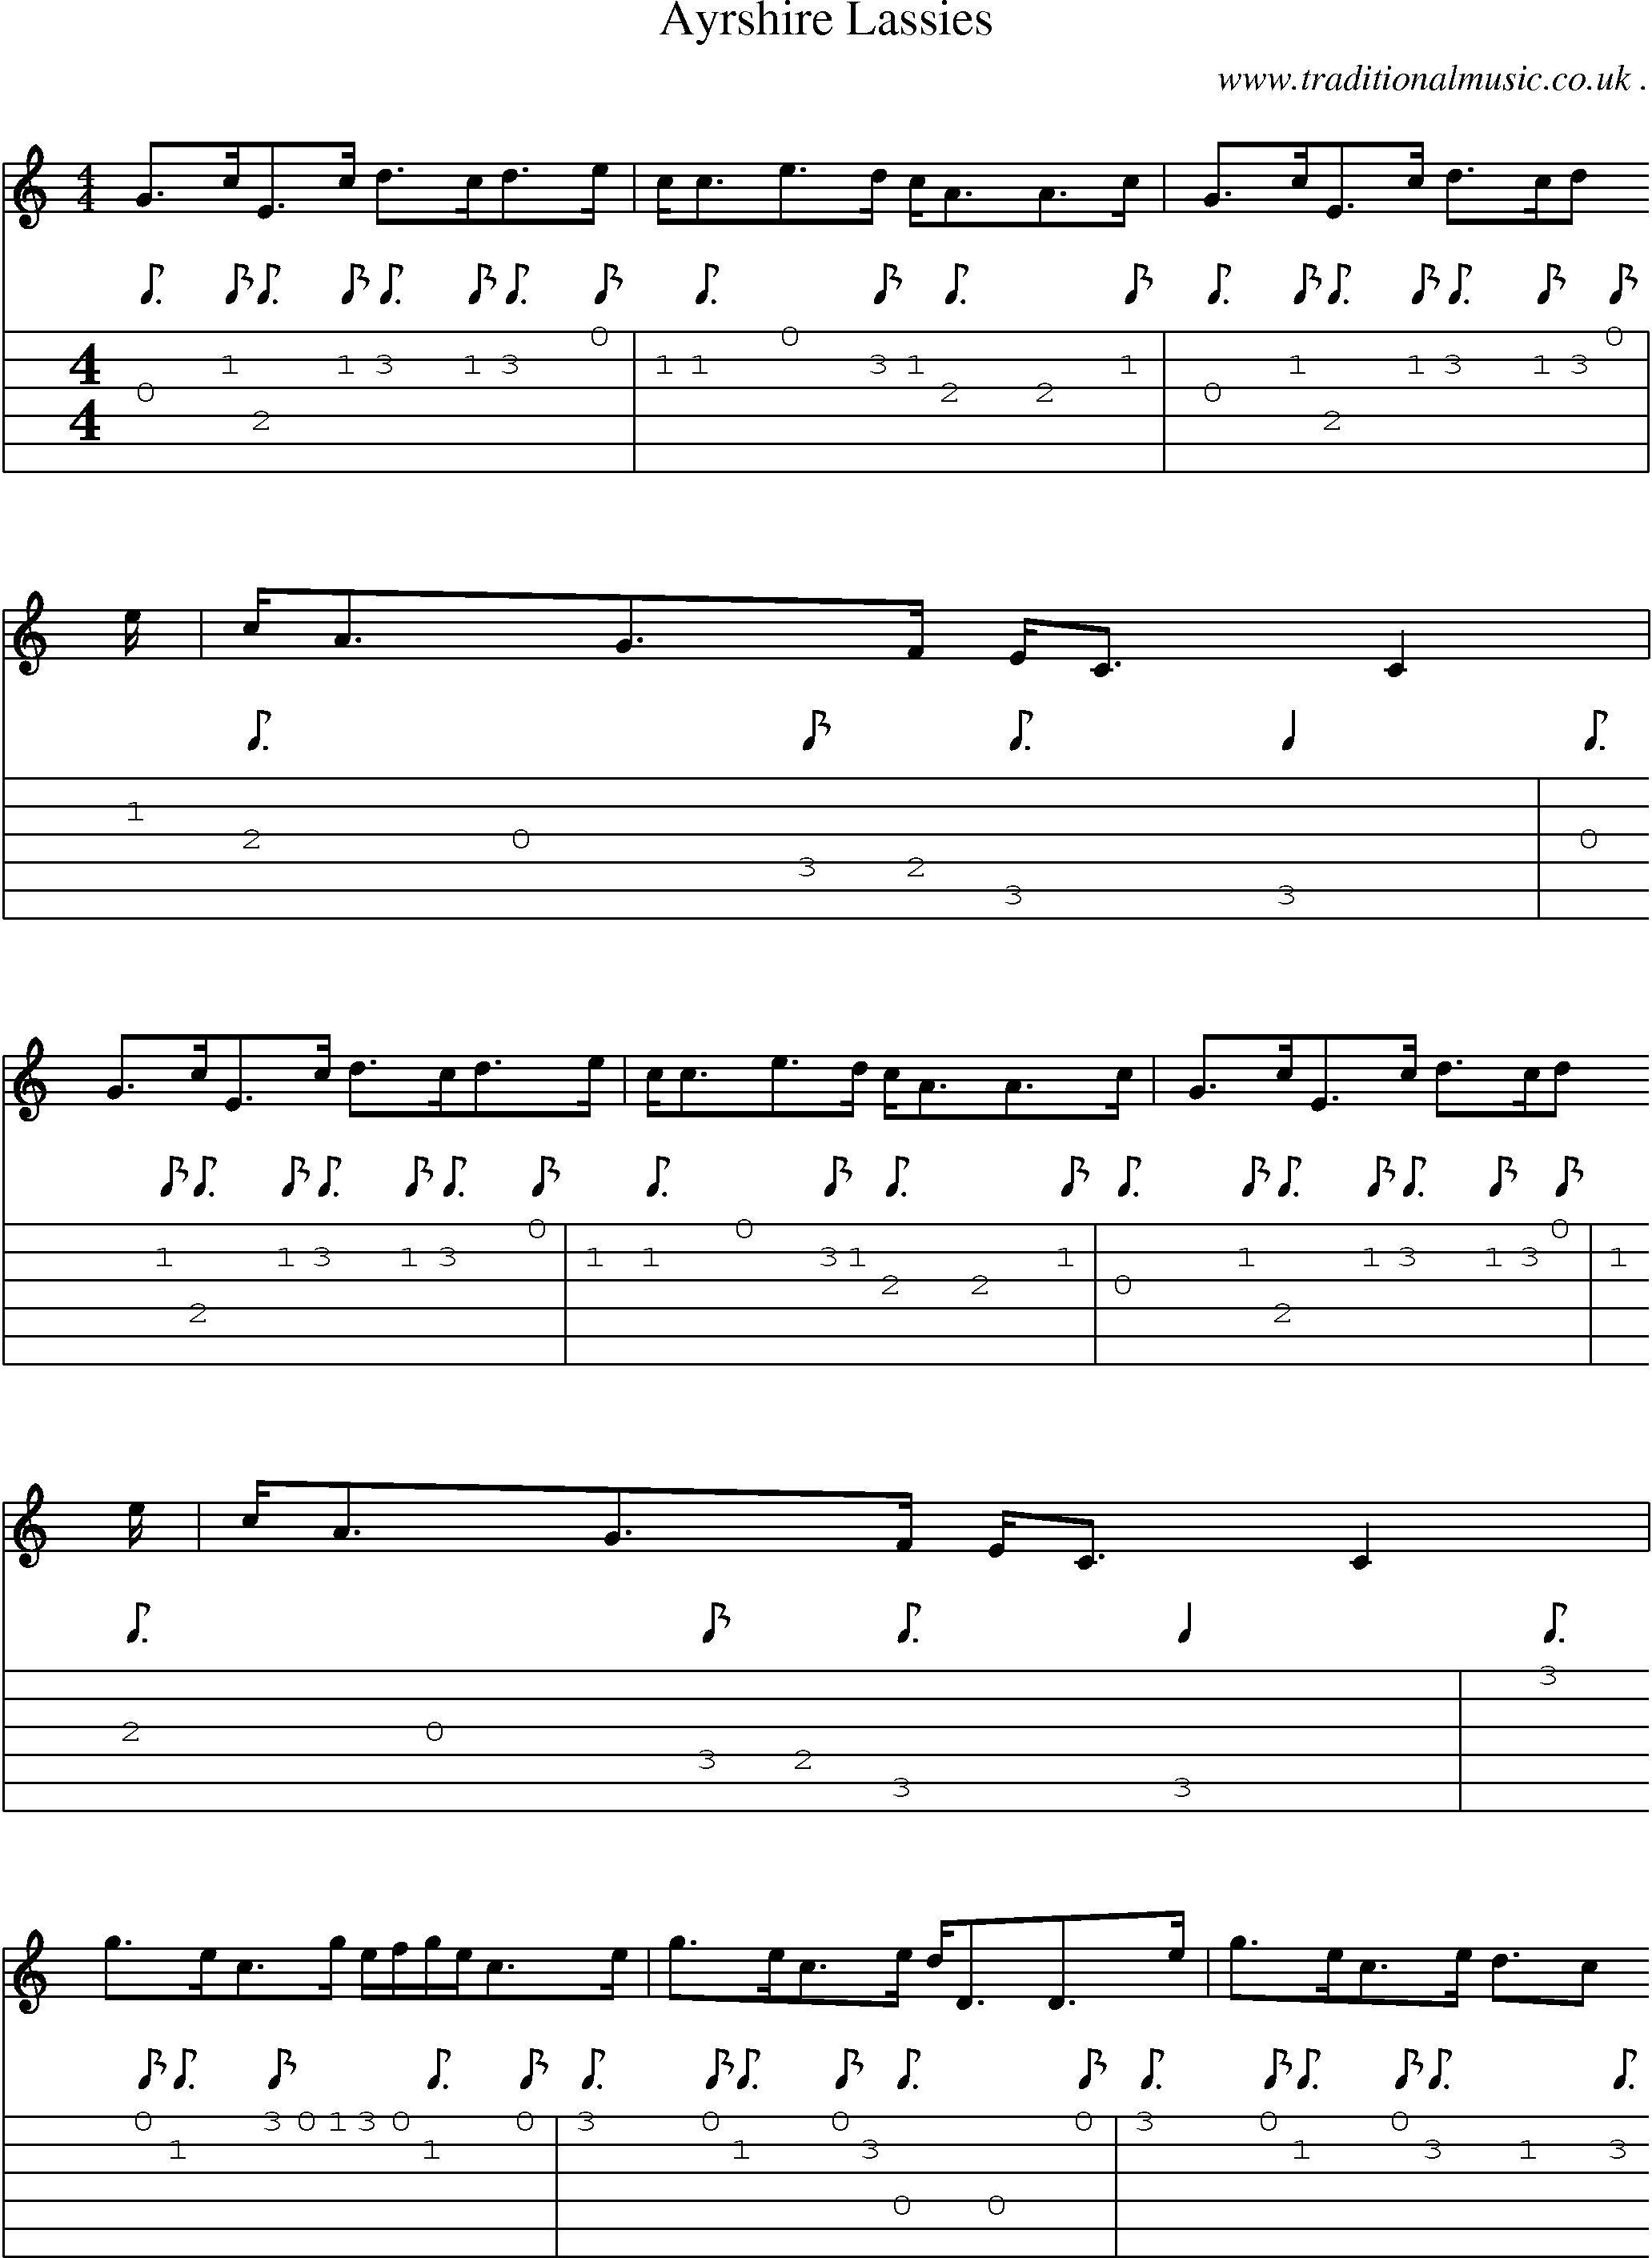 Sheet-Music and Guitar Tabs for Ayrshire Lassies